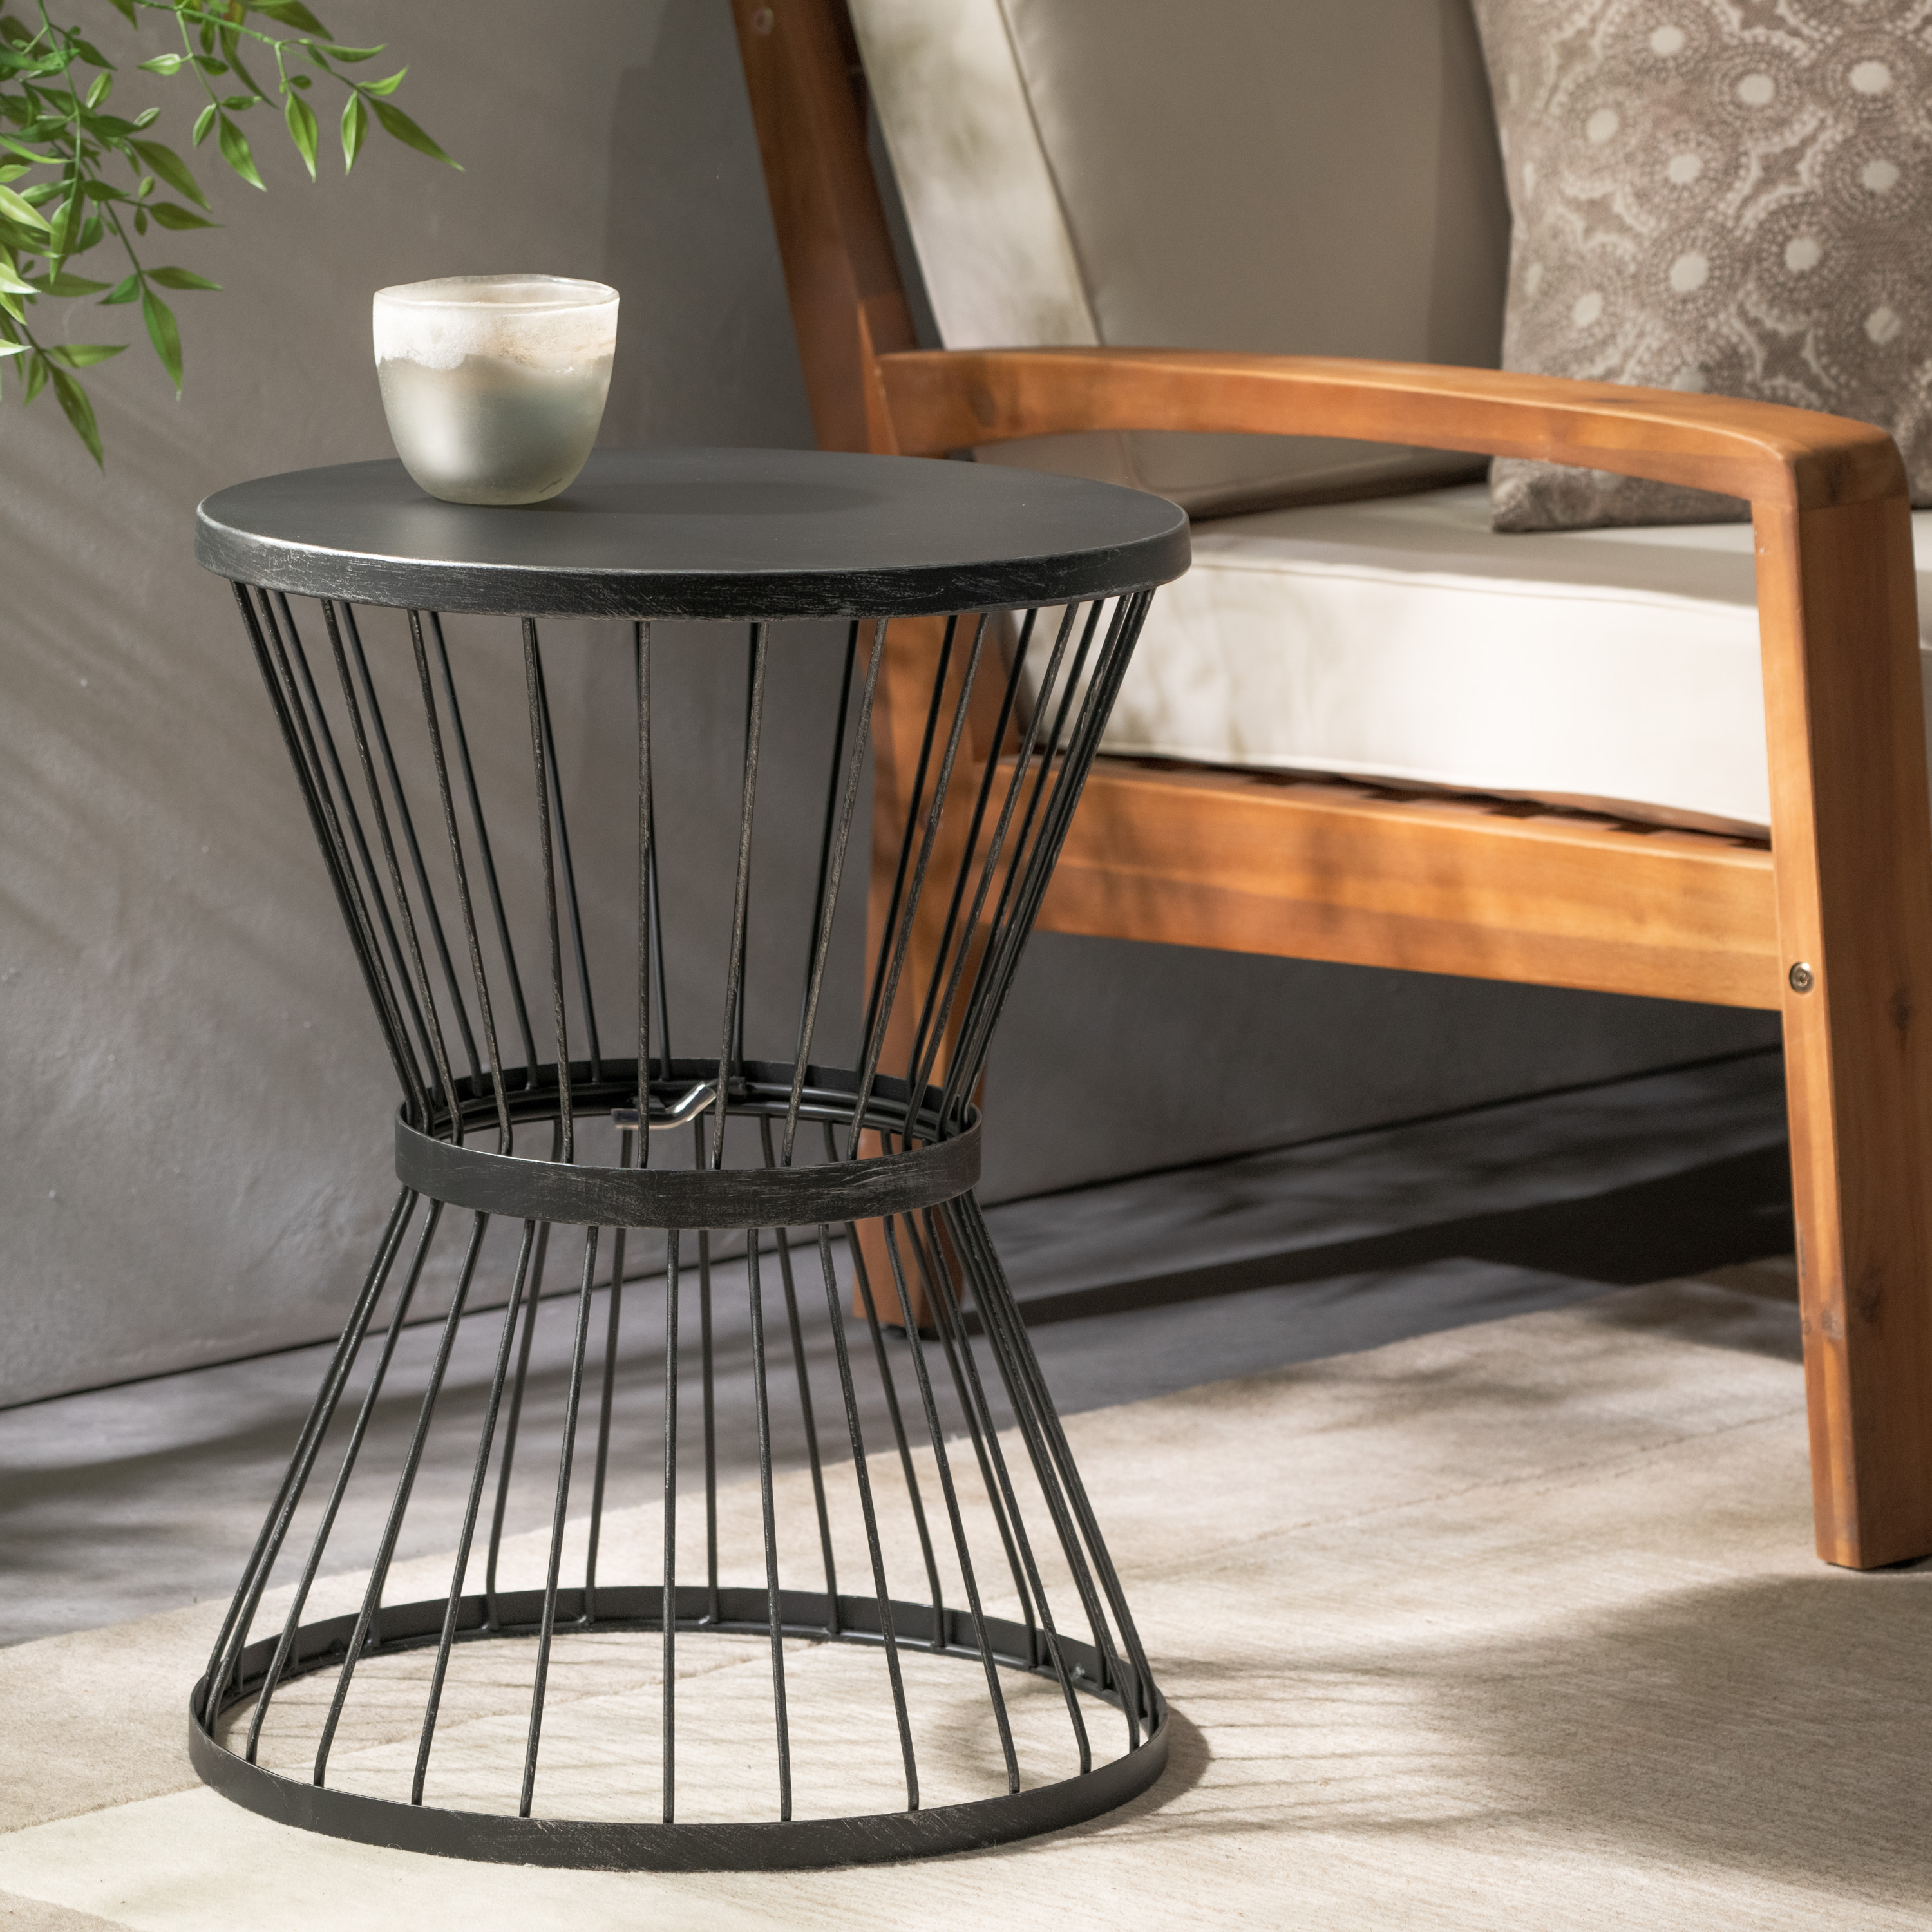 Noble House Lassen Outdoor Metal 16 Inch Side Table in Matte Black - image 1 of 7